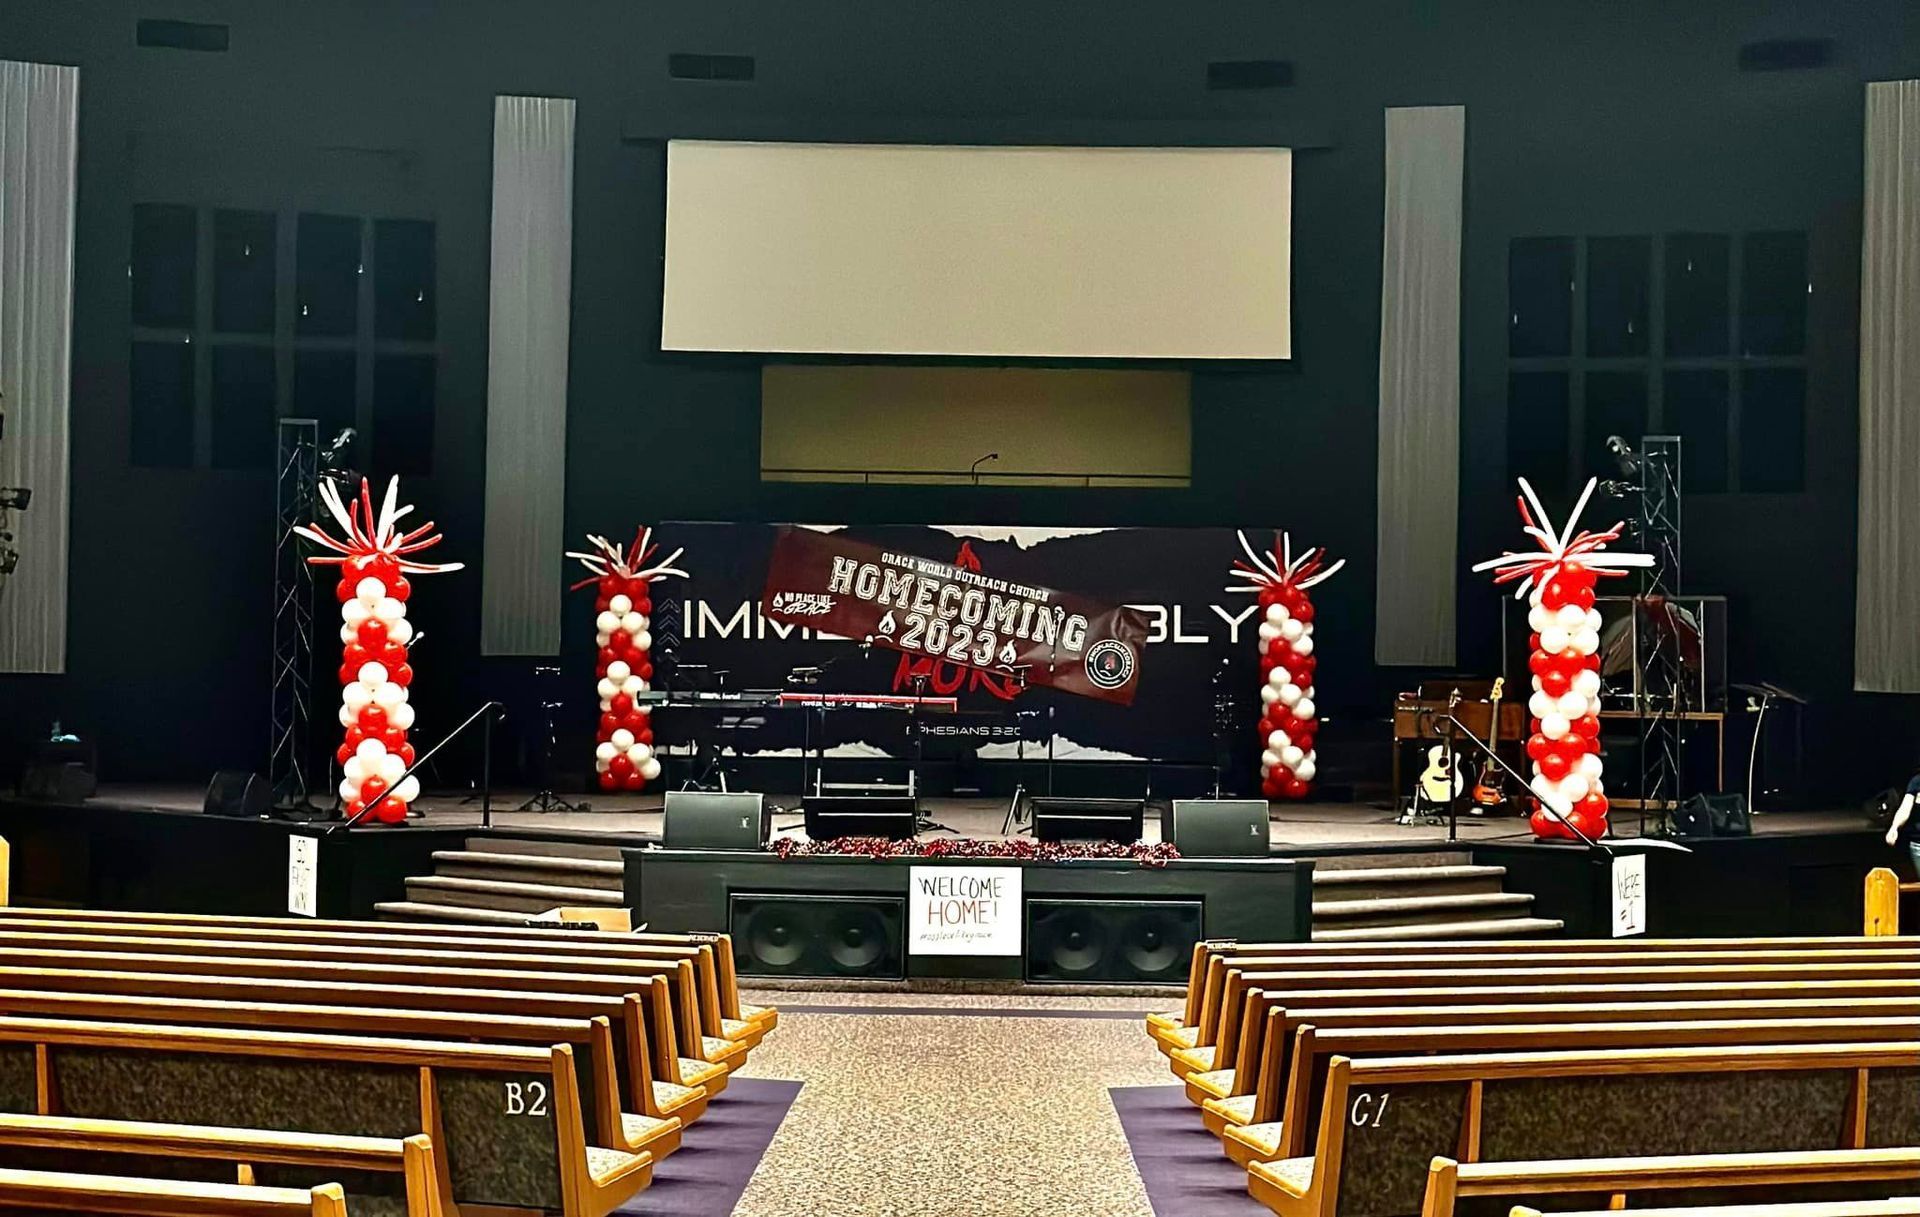 A church is decorated with balloons and a large screen